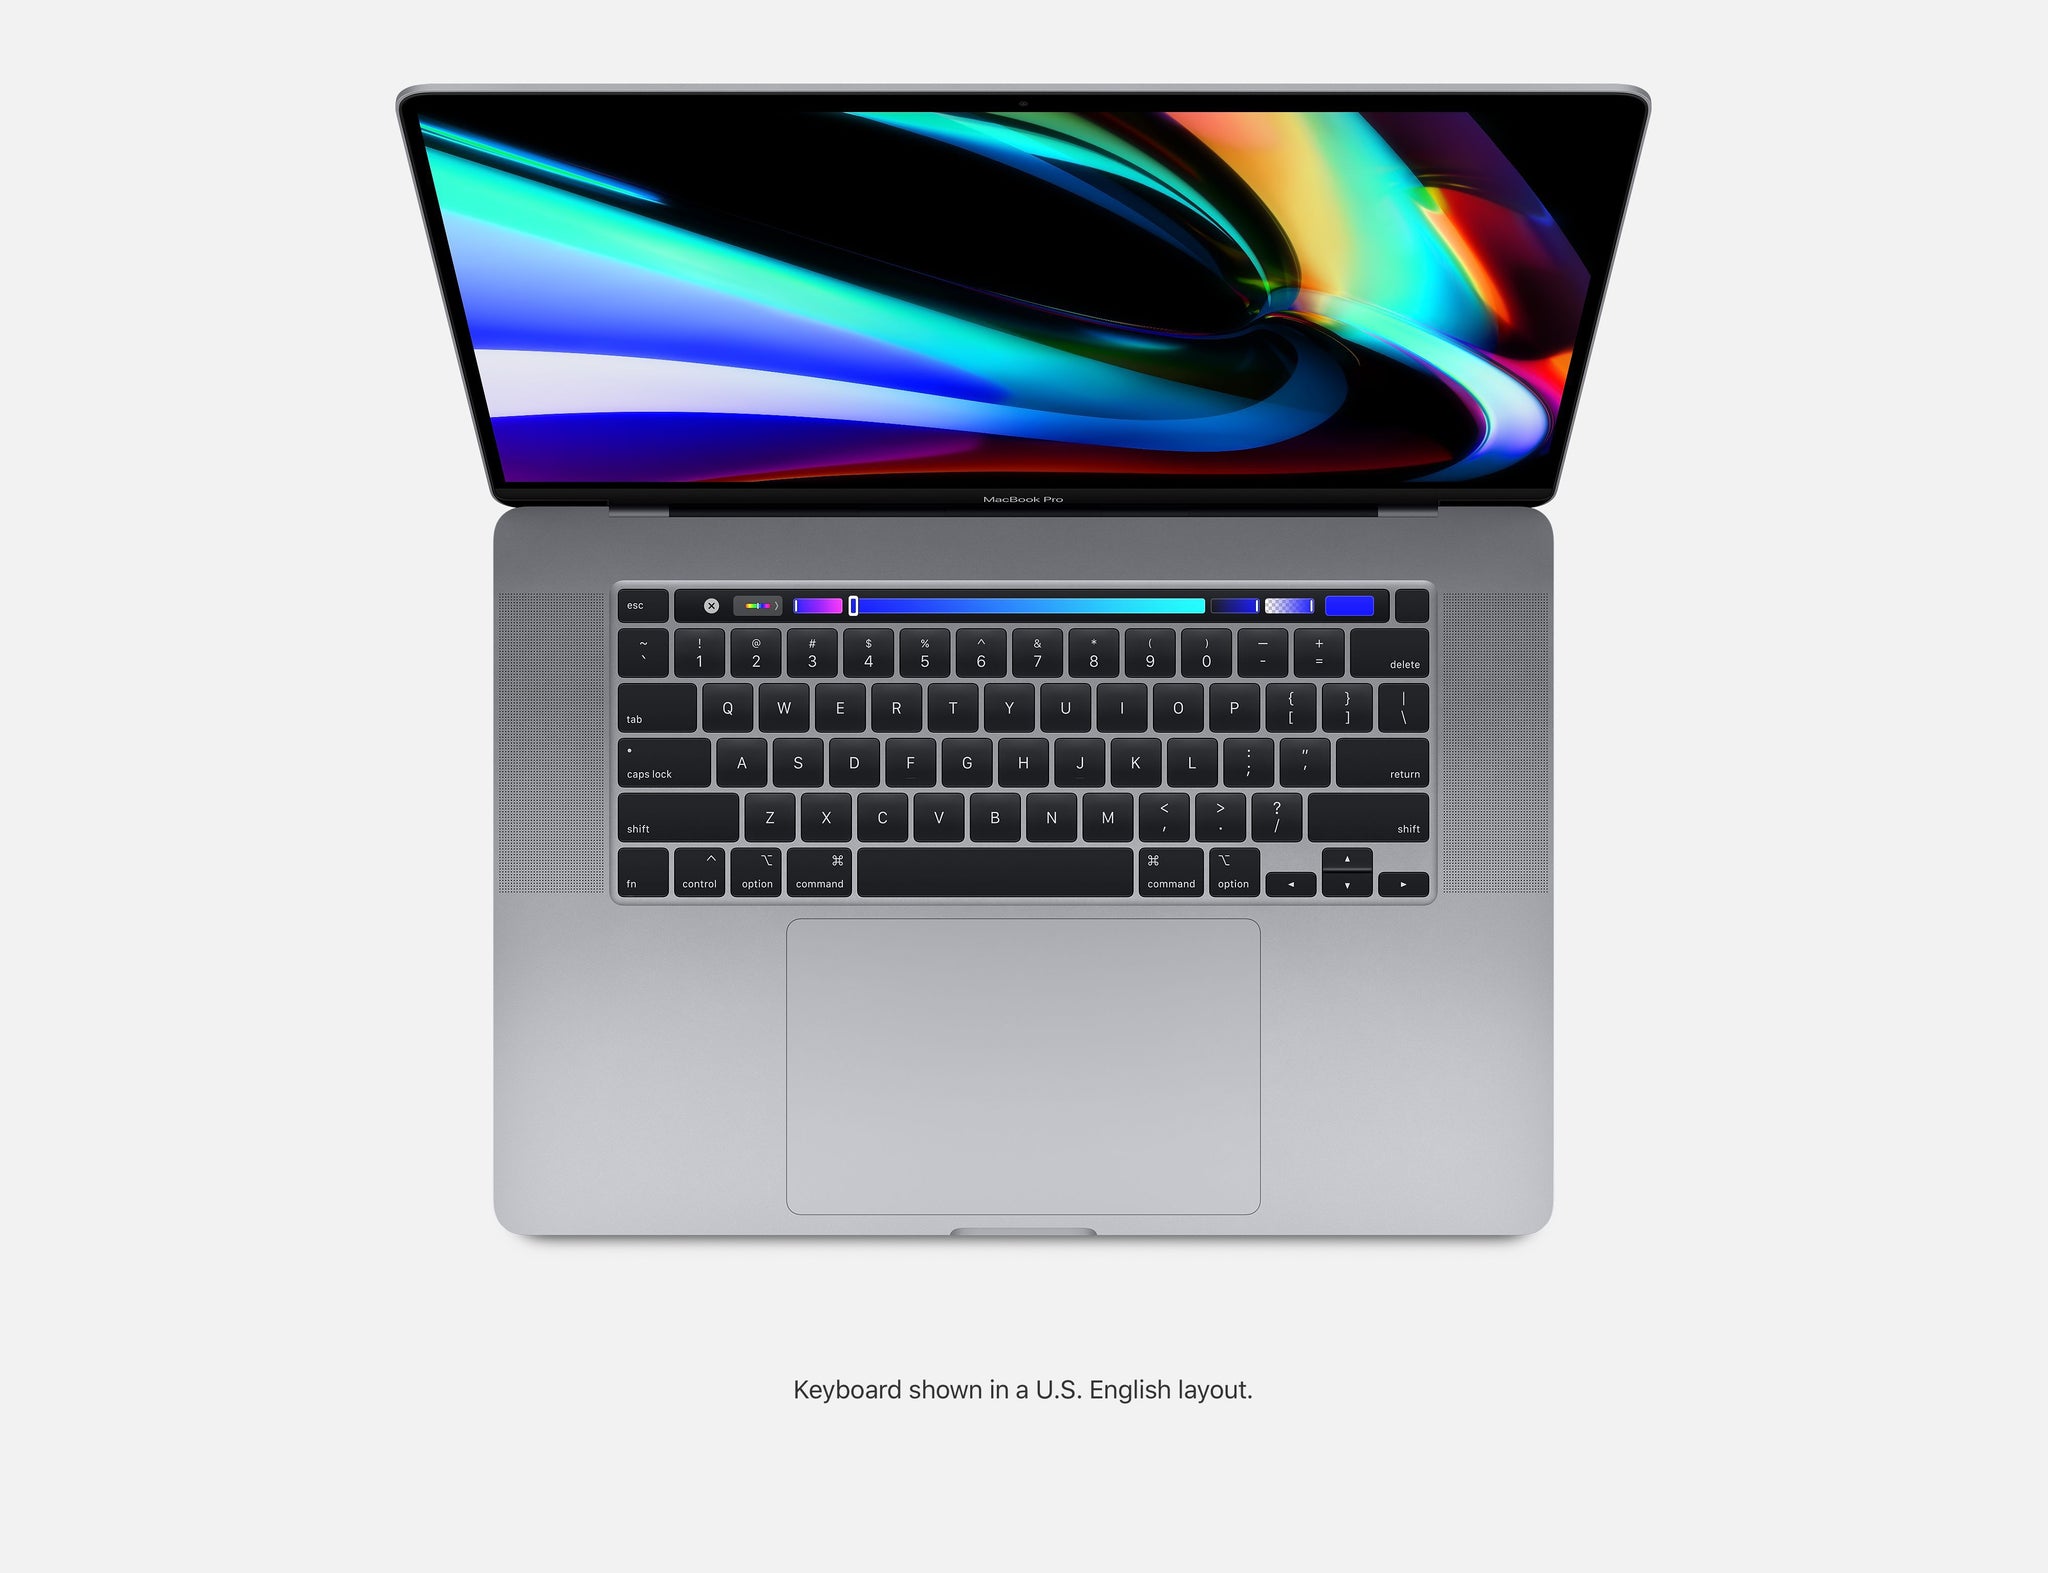 Apple MacBook Pro 16" with Touch Bar,9th-Gen 6-Core Intel Core i9 2.6GHz,16GB RAM,512GBSSD,Late 2019